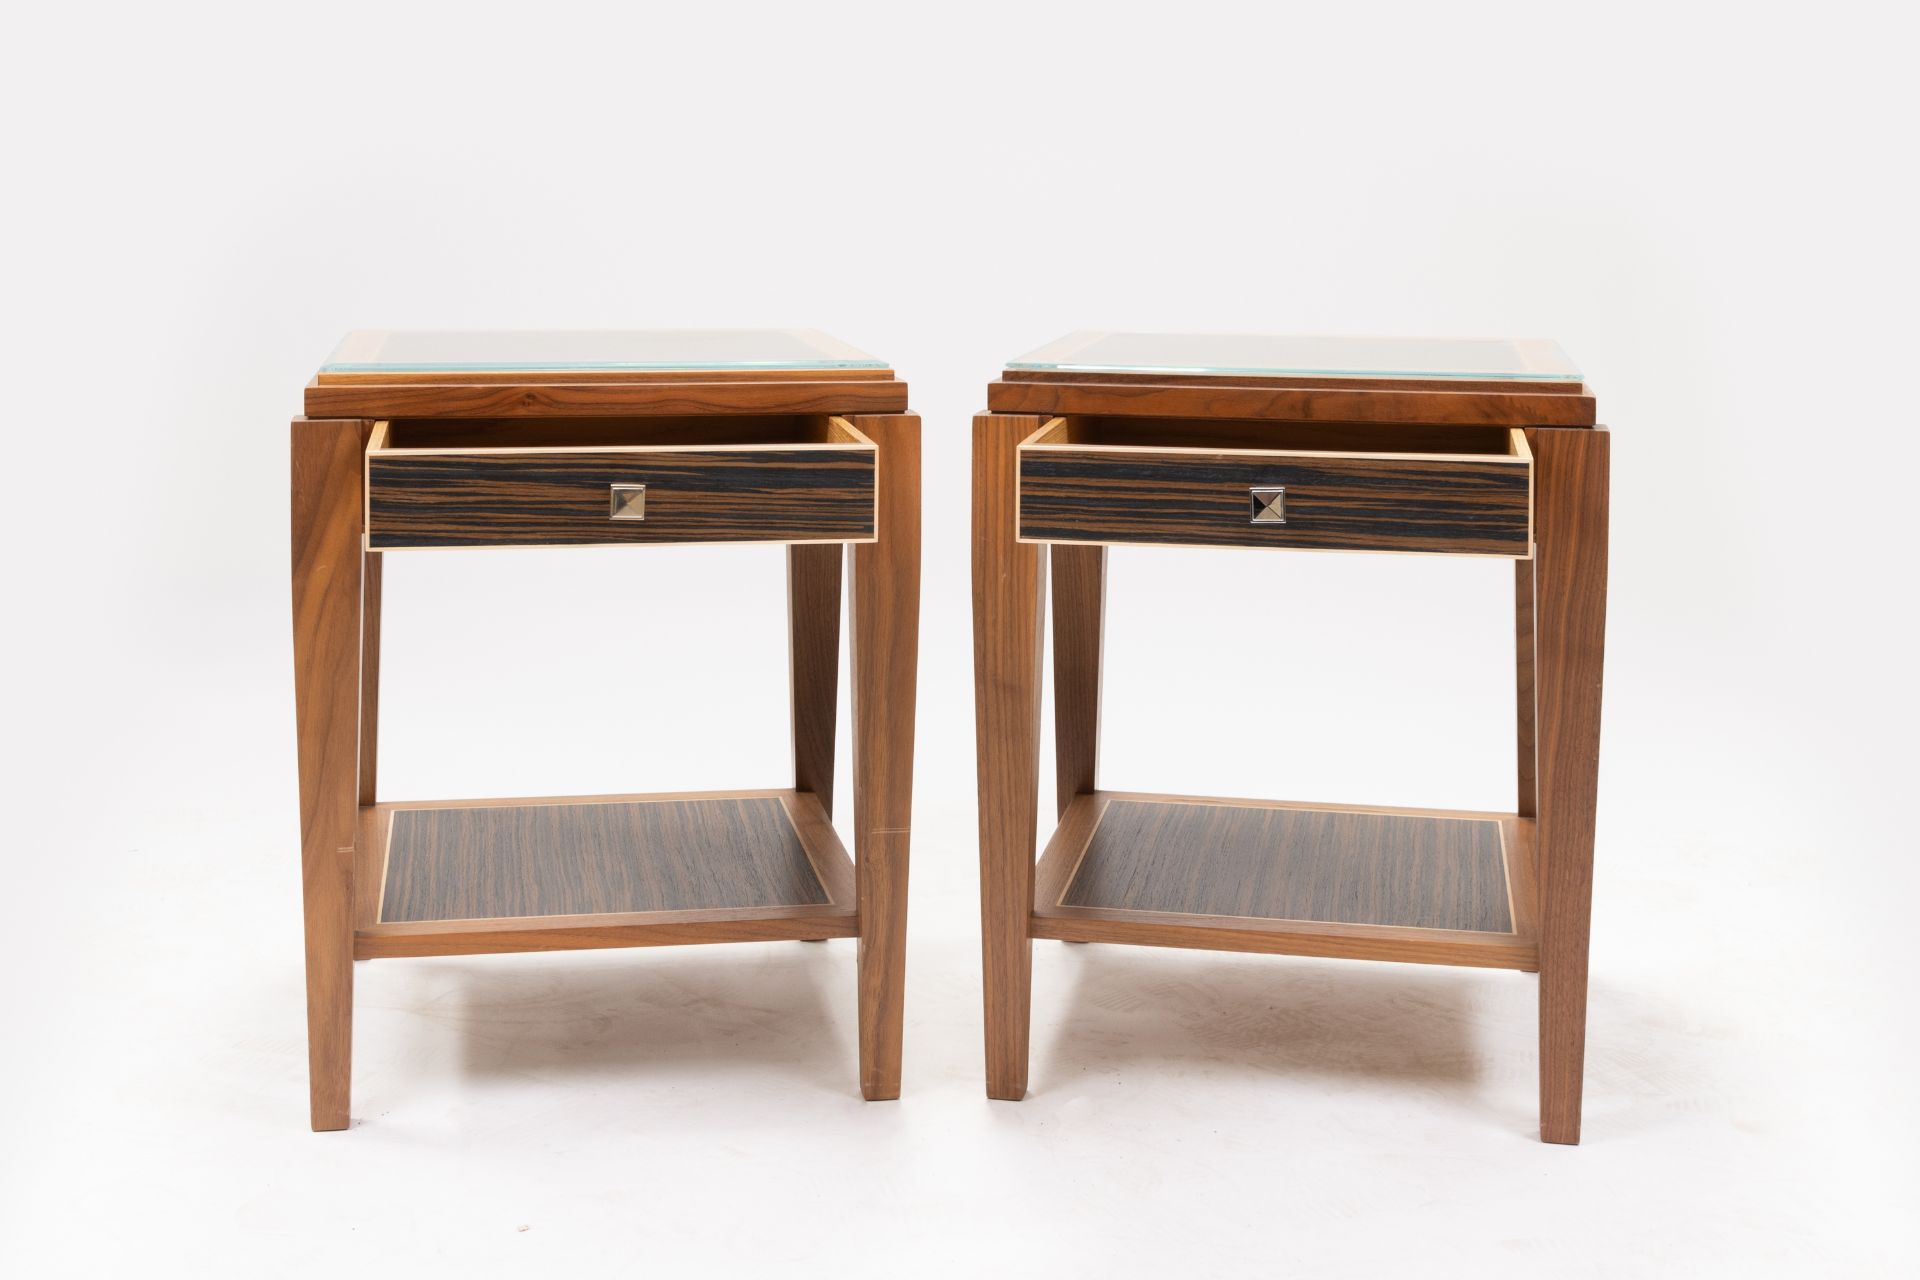 Bespoke Pair of David Linley Side Table for Claridge's - Image 4 of 5